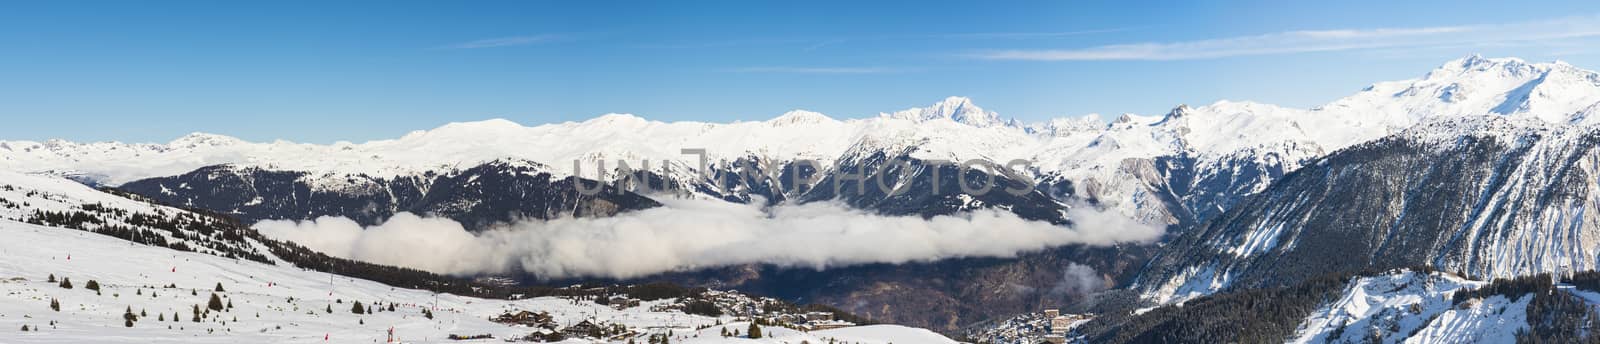 Panoramic view down snow covered valley in alpine mountain range with coniferous pine trees and clouds